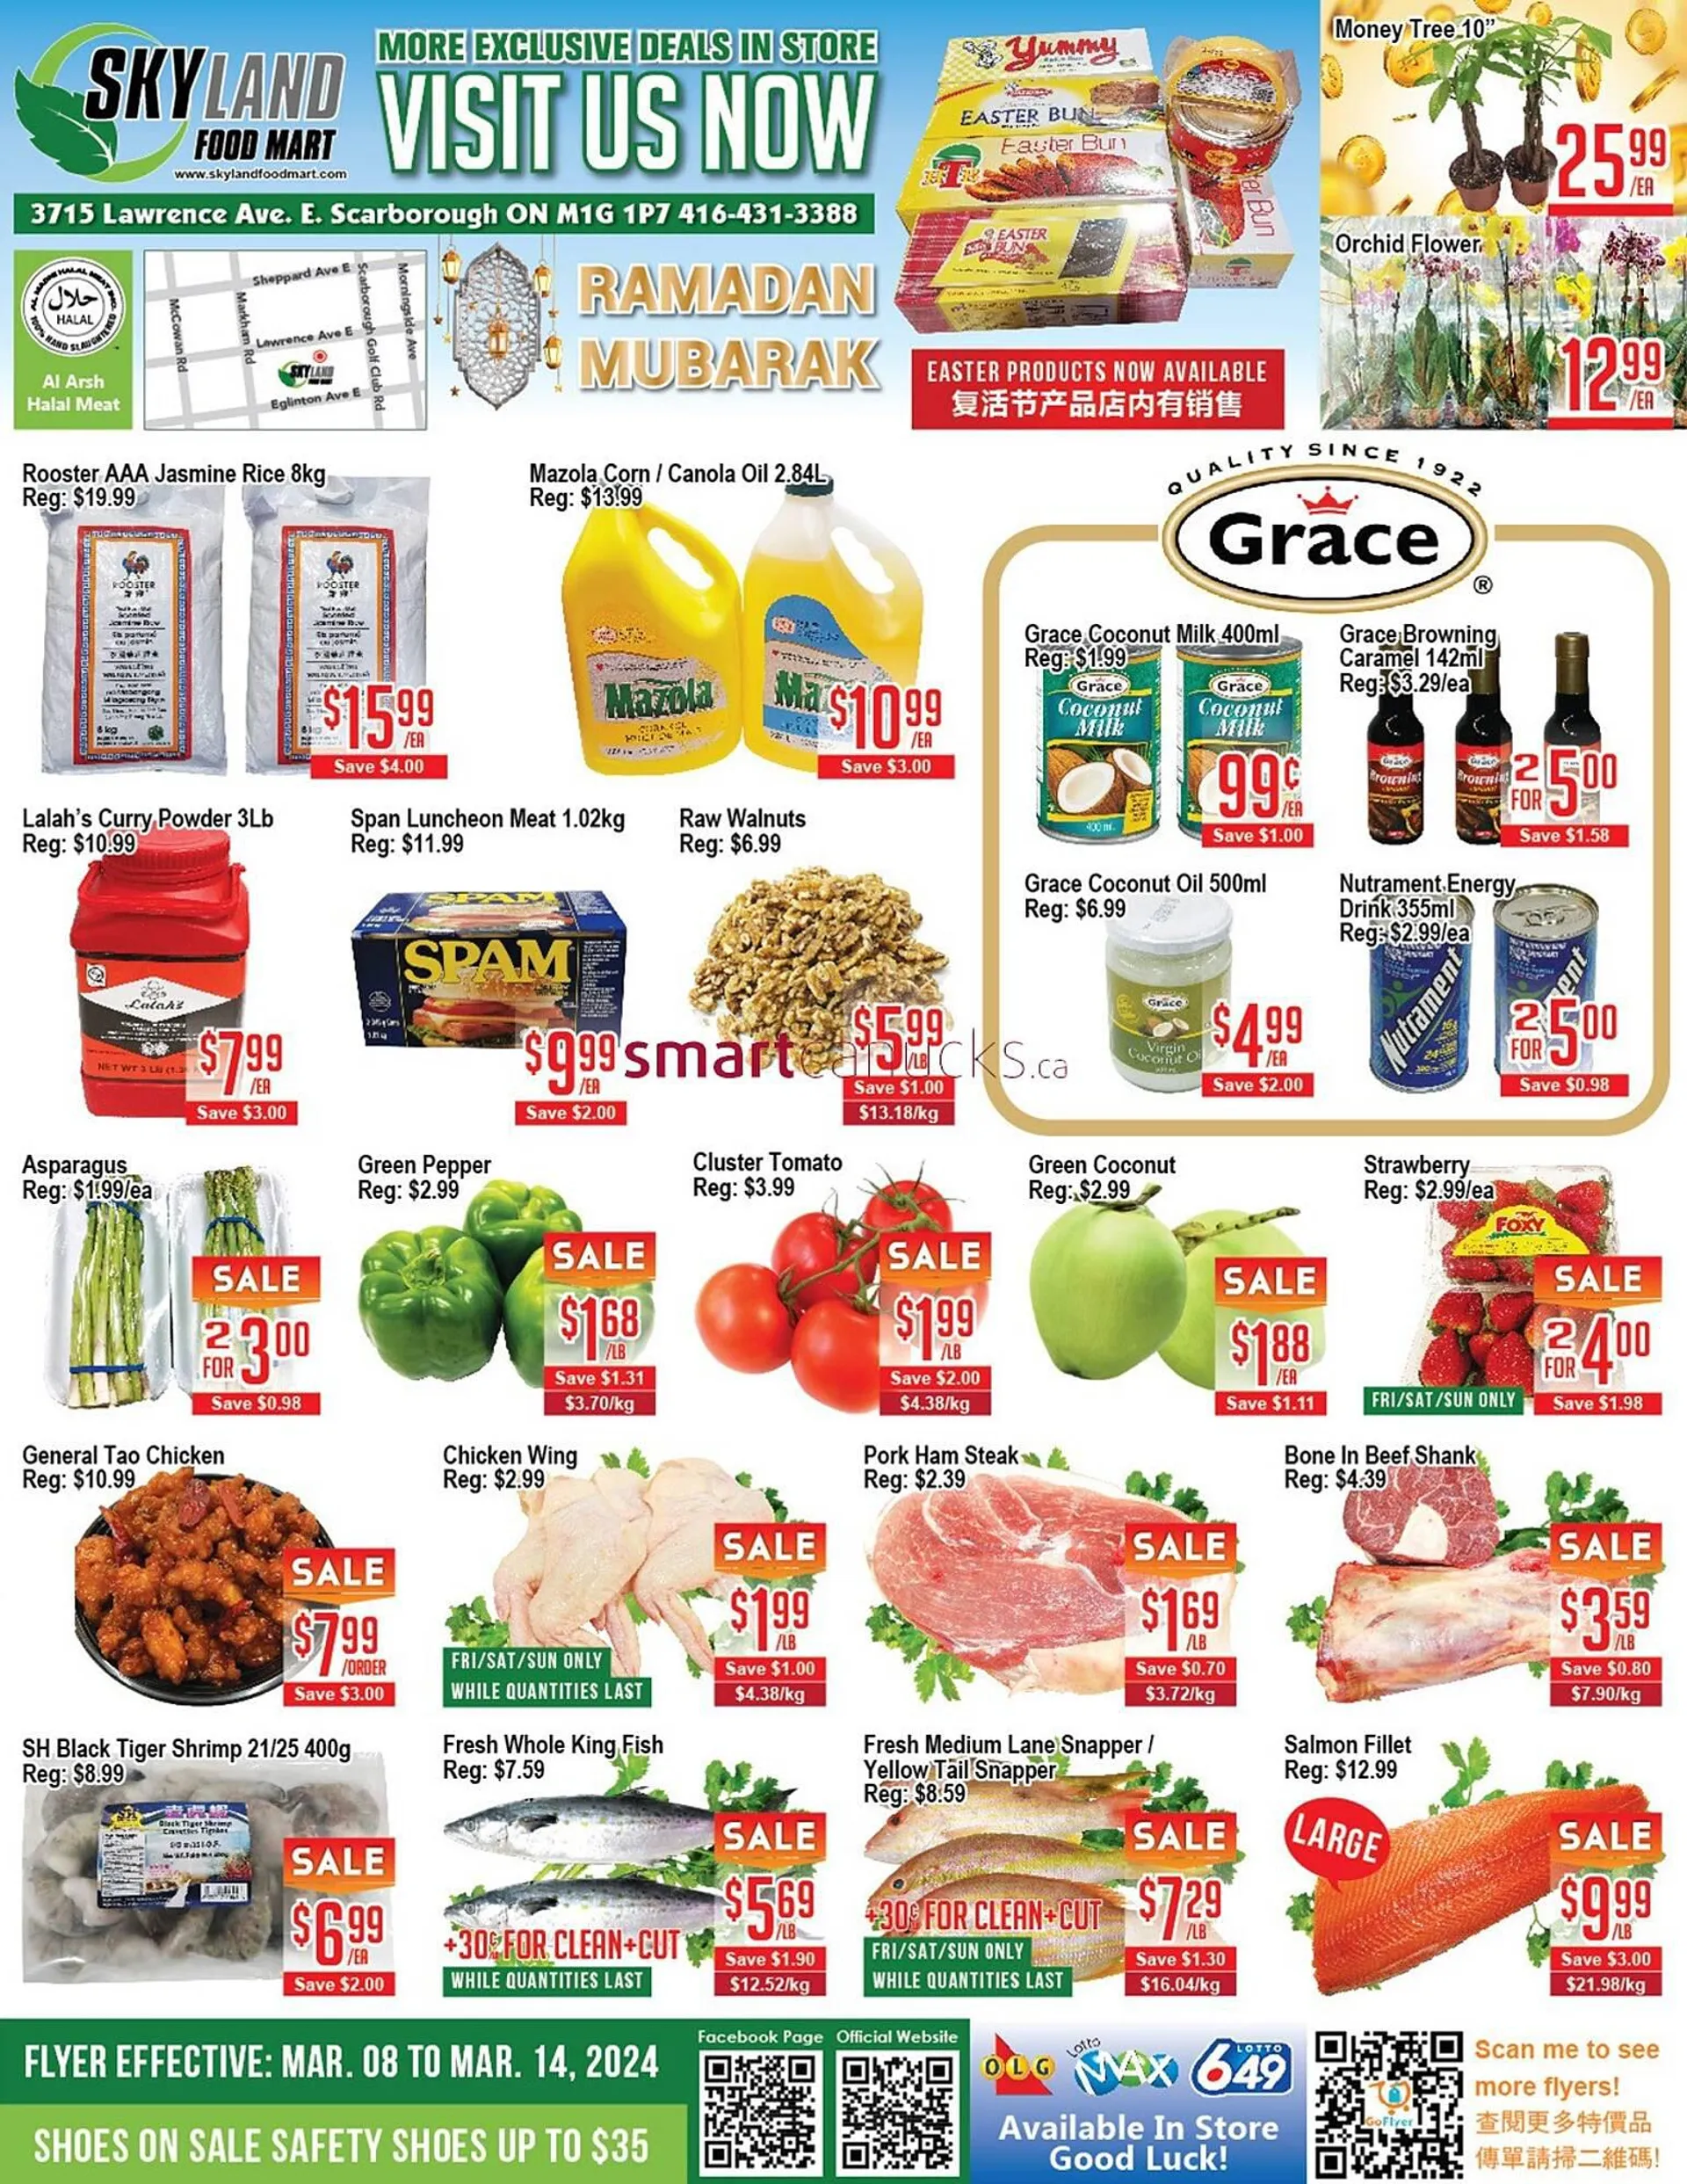 Skyland Foodmart flyer from March 8 to March 14 2024 - flyer page 